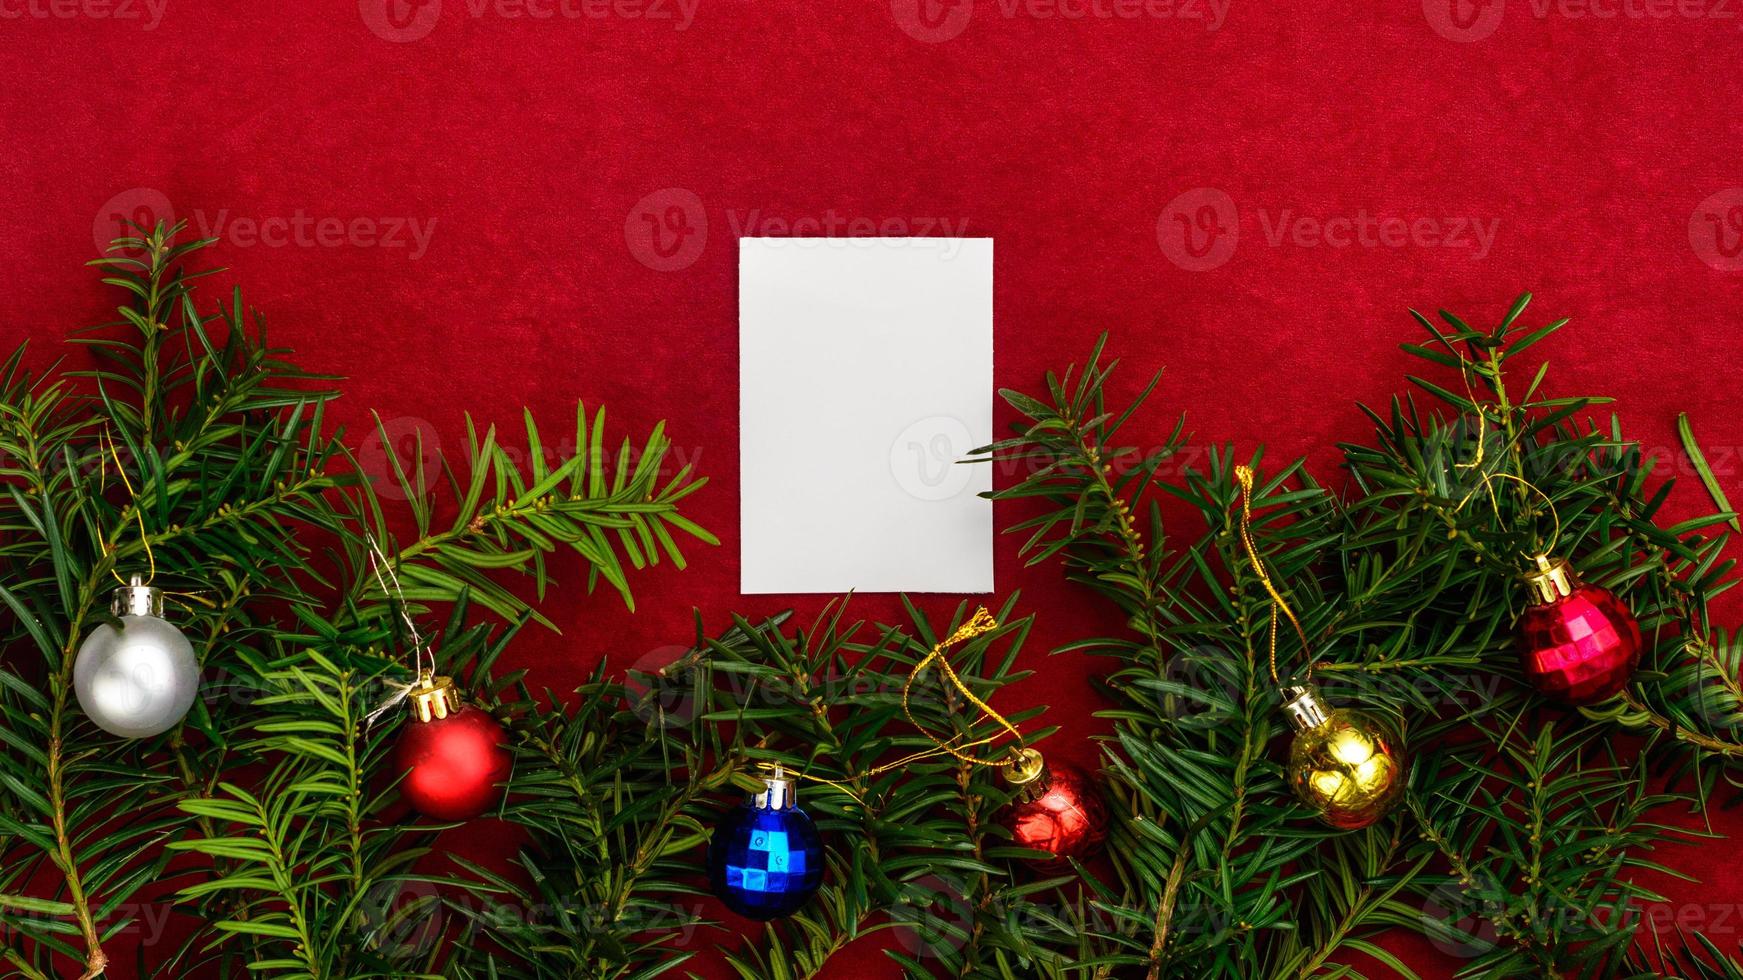 Piece of paper for Christmas wishes on a red background with branches of Christmas tree and Christmas balls. photo